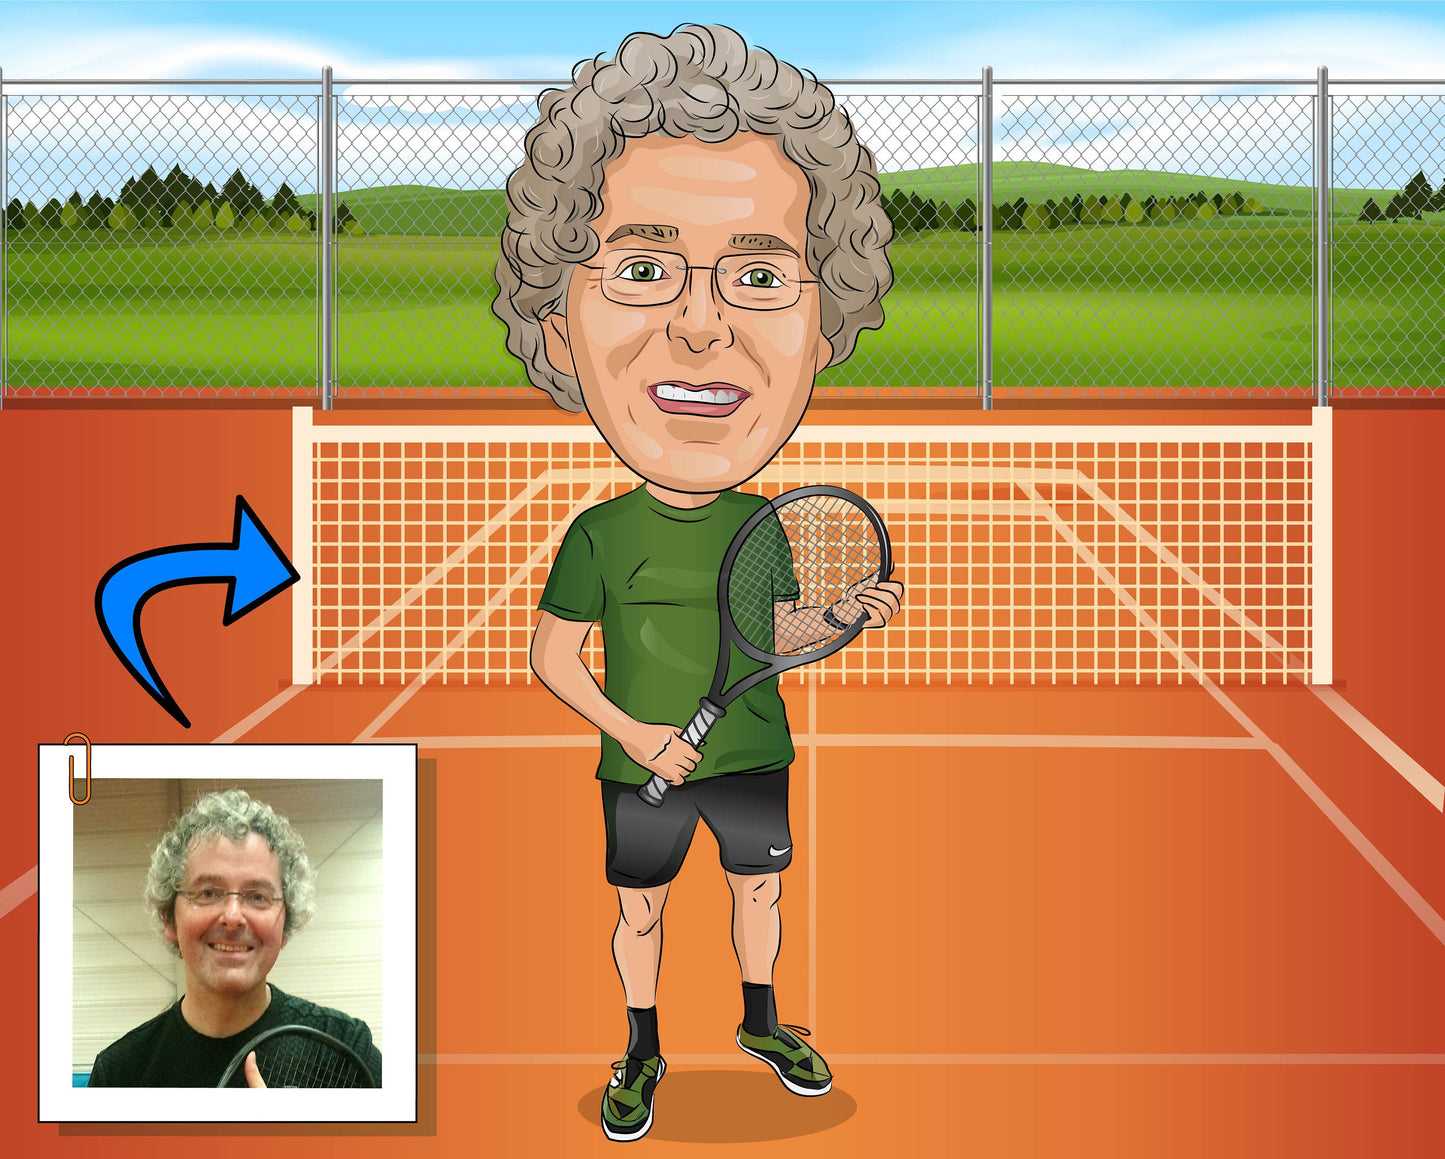 Badminton Player Gift - Custom Caricature Portrait From Your Photo/Badminton gifts